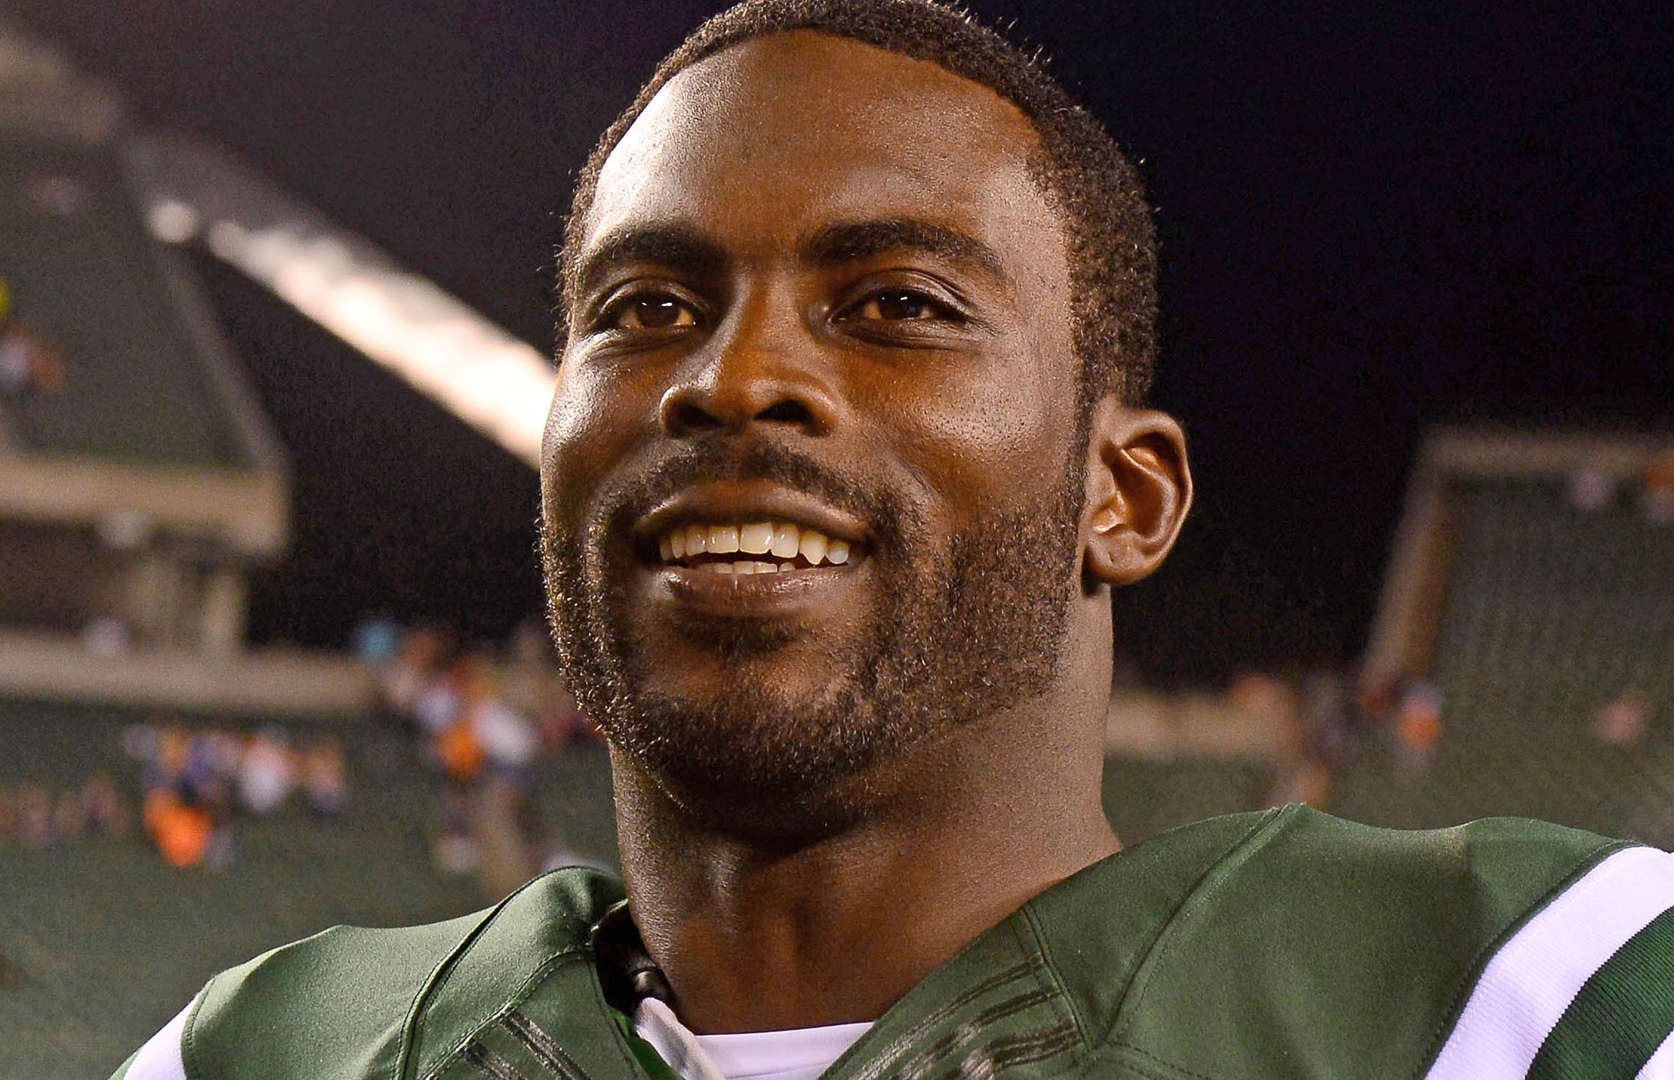 New York Jets quarterback Michael Vick (1) looks on after the game against the Cincinnati Bengals at Paul Brown Stadium.